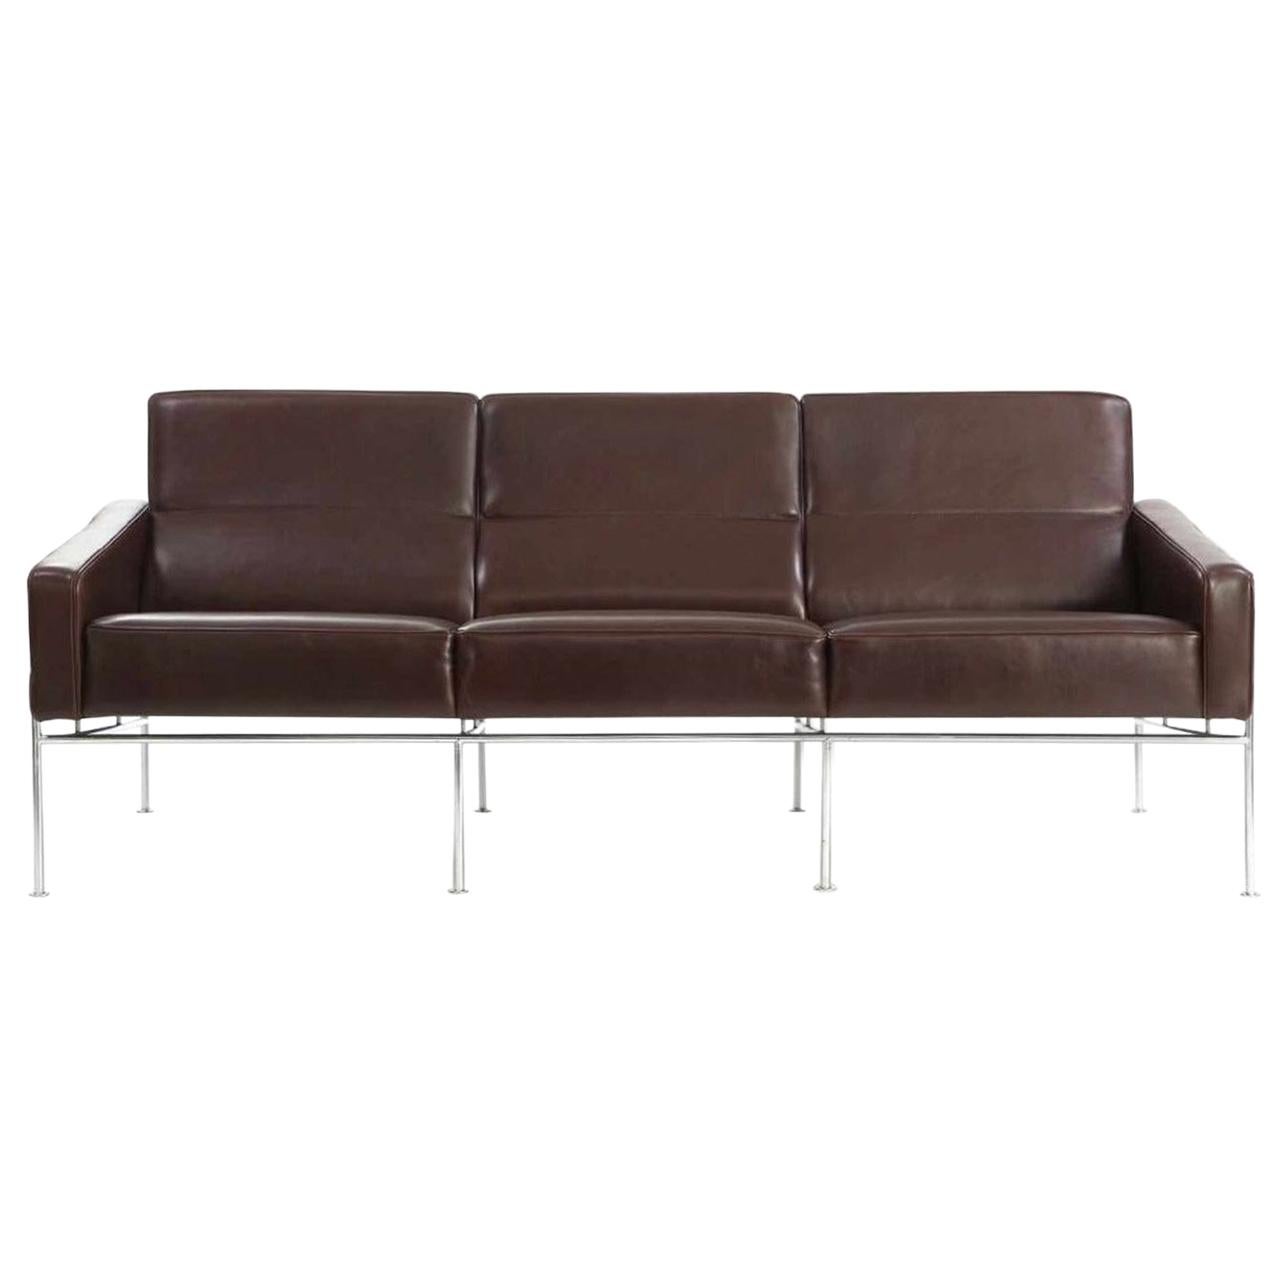 Sofa by Arne Jacobsen for Fritz Hansen Mod. 3300 / 3 in Brown Leather